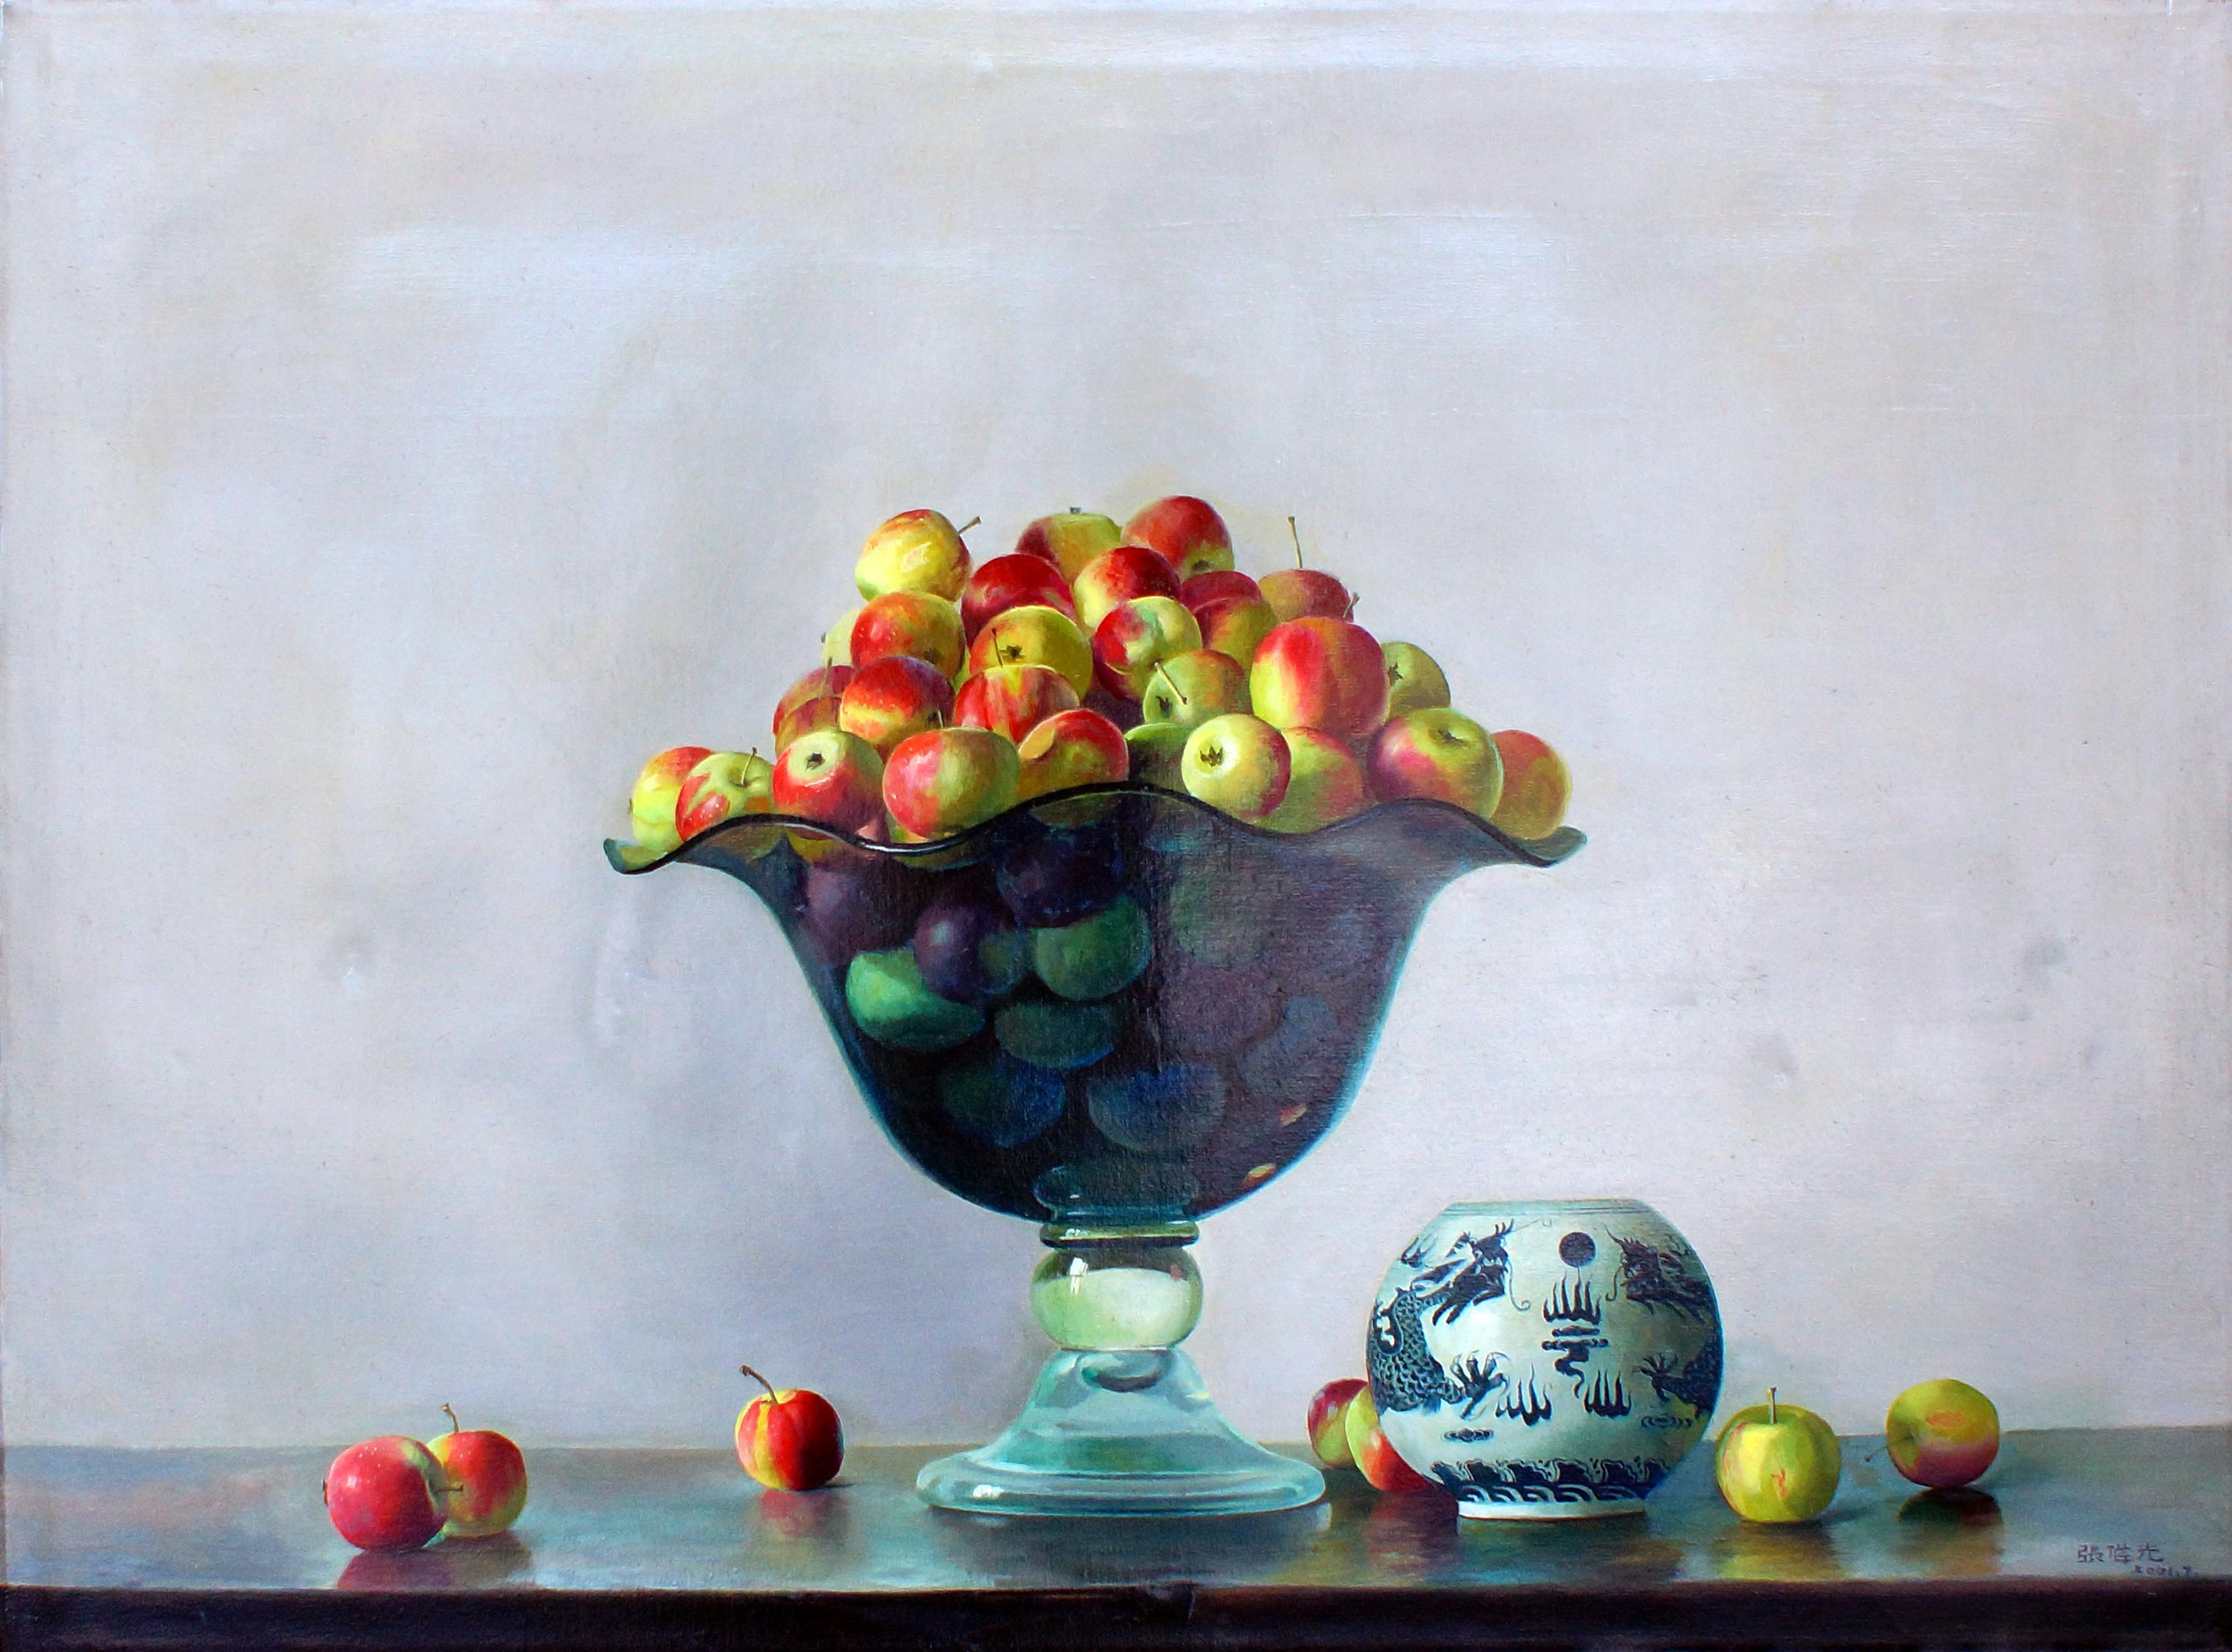 Zhang Wei Guang Still-Life Painting - Crystal Vase with apples - Oil on Canvas - 2001